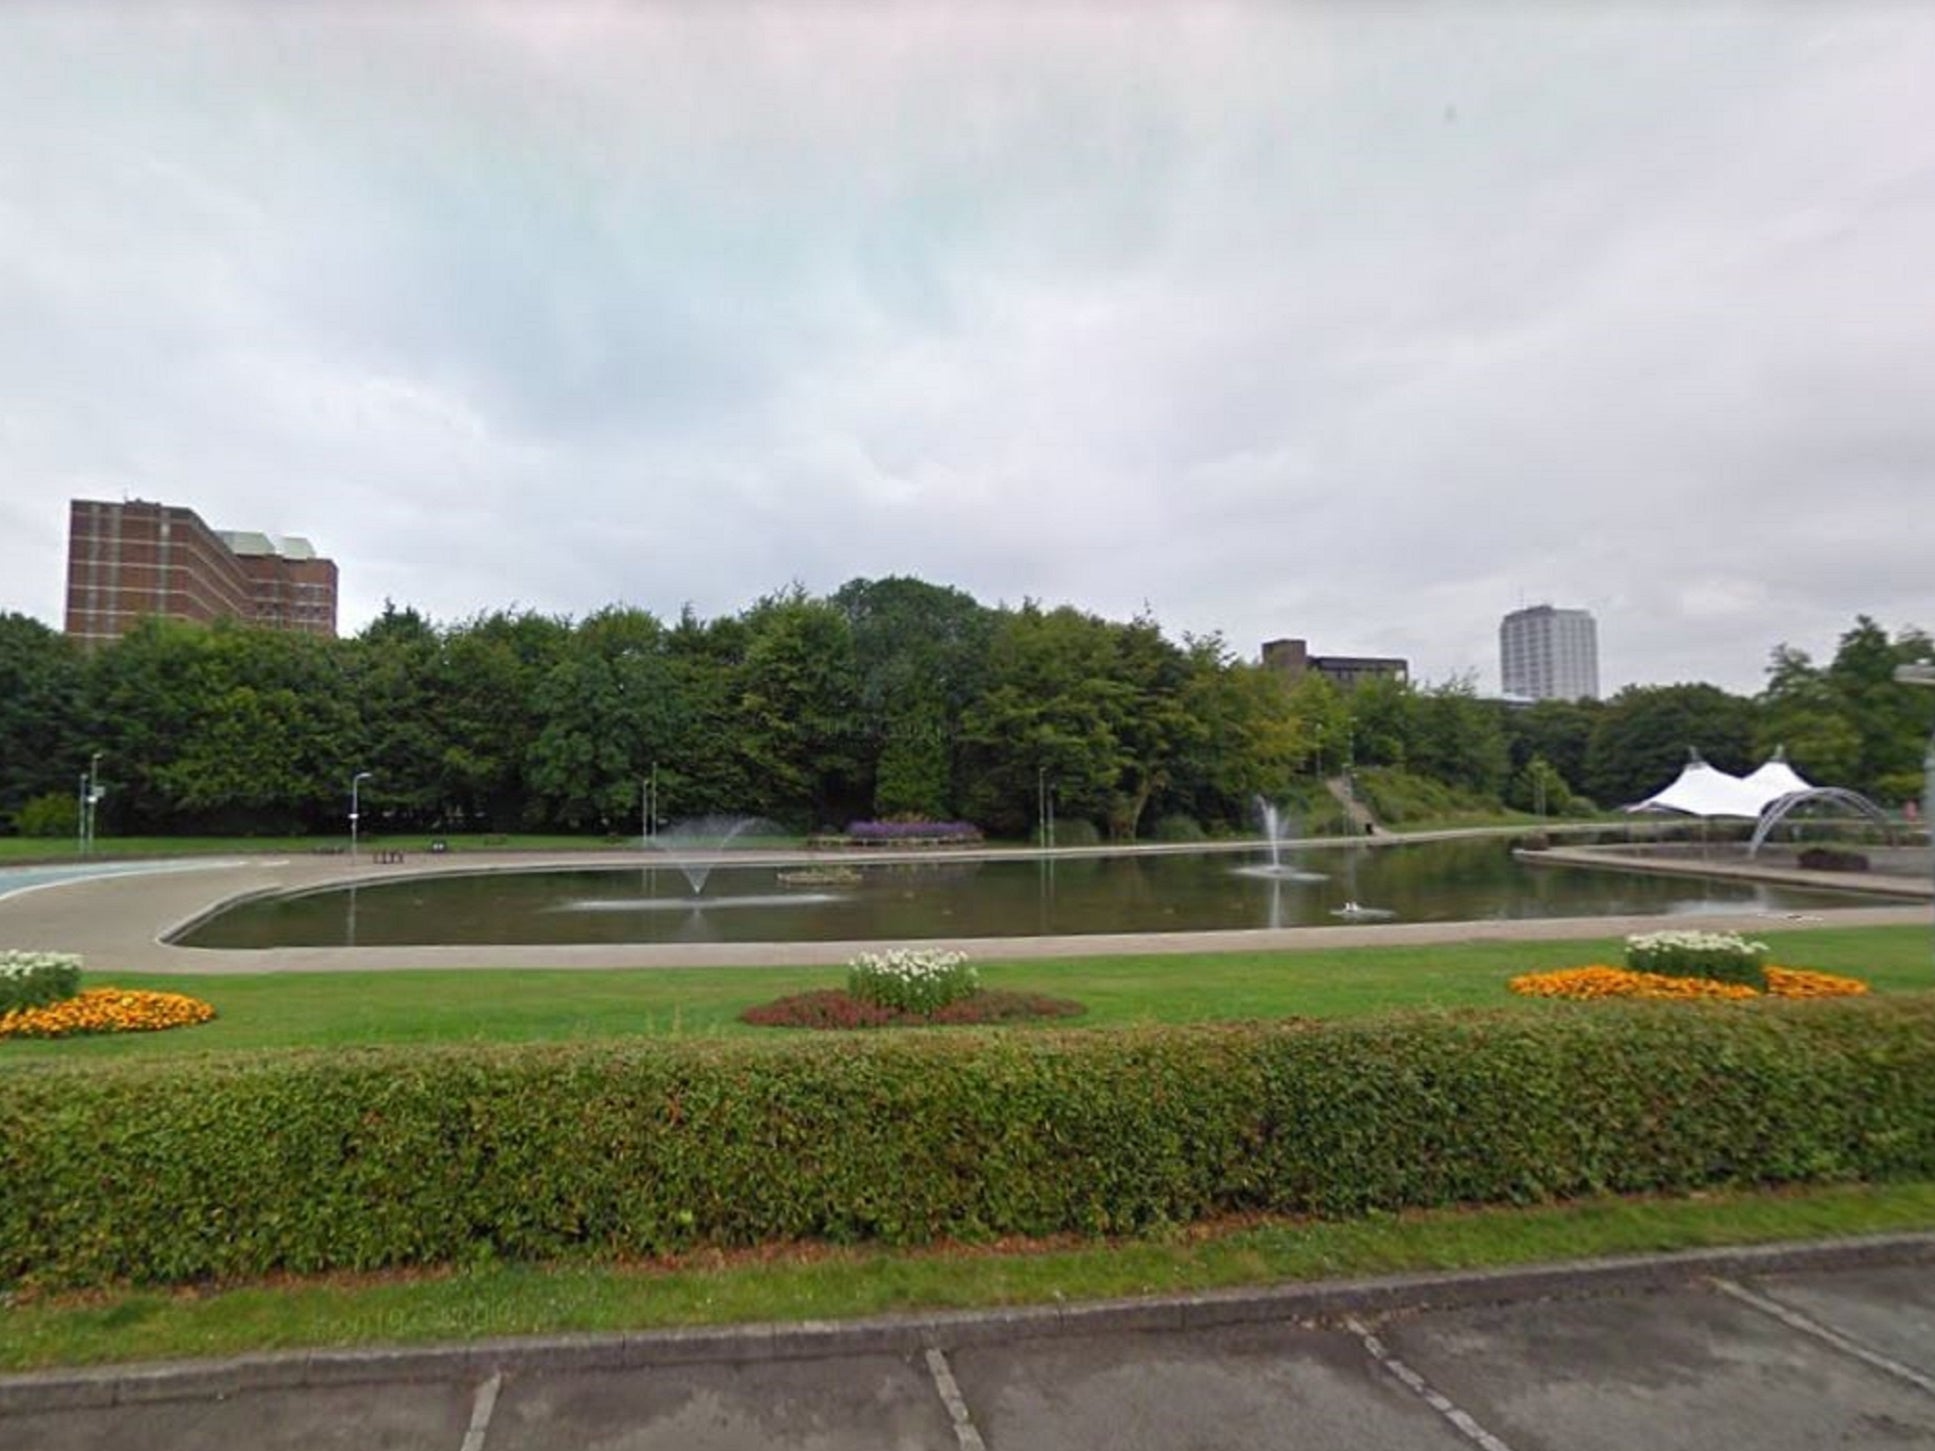 Google street view image of Eastrop Park in Basingstoke, Hampshire, where a man attempted to abduct a two-year-old girl from a pushchair nearby